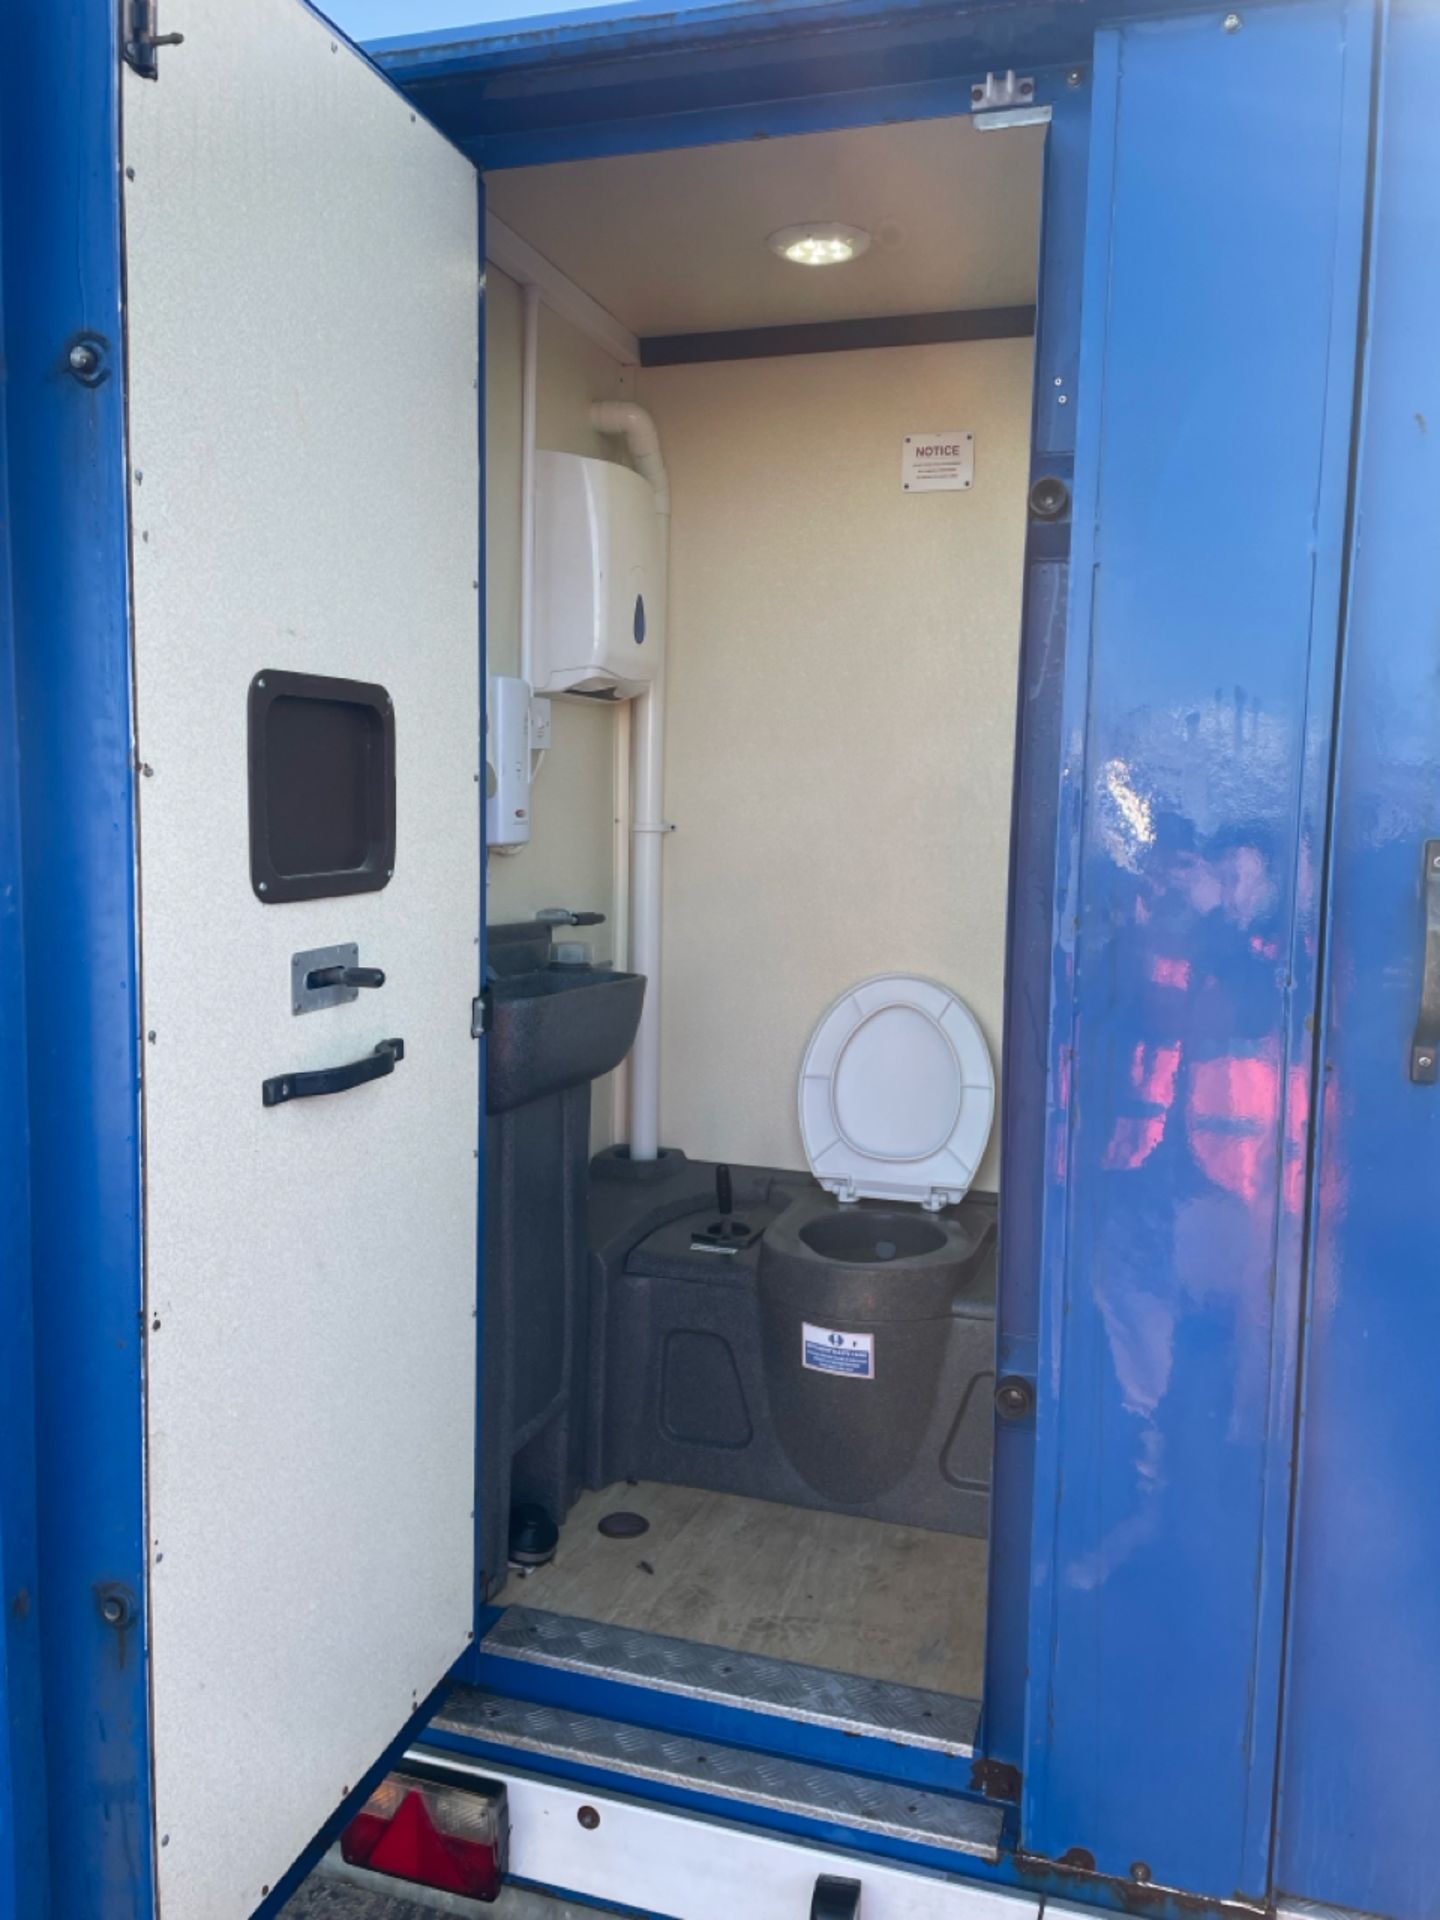 2014 GROUNDHOG GP360 TOWABLE WELFARE UNIT, MODEL: G360AD18, DOM: 08/2014, INCLUDES MICROWAVE, - Image 19 of 21